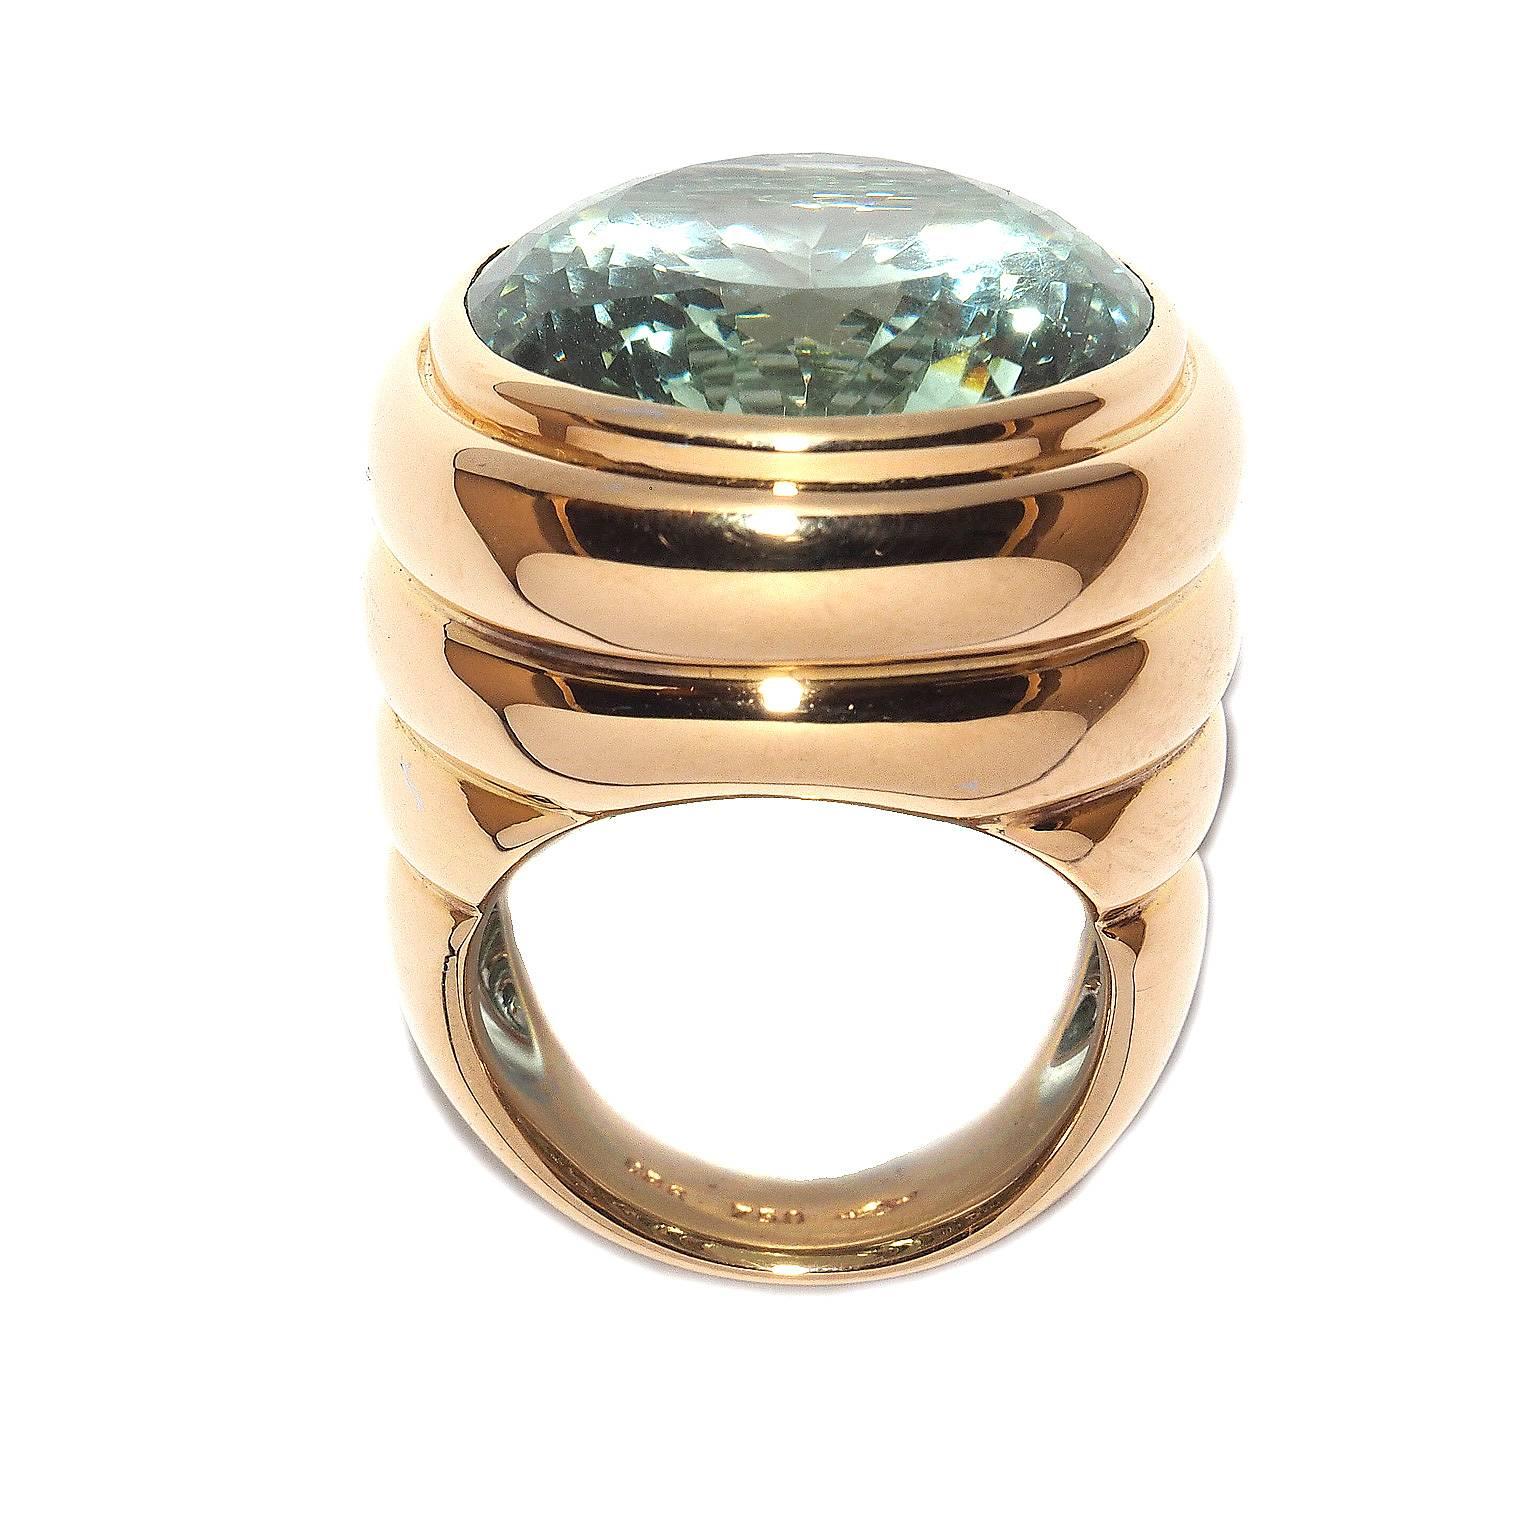 This light green beryl, cut to perfection, is in an eye-catching ring in 18k rosé gold. This ring has a size of 57.